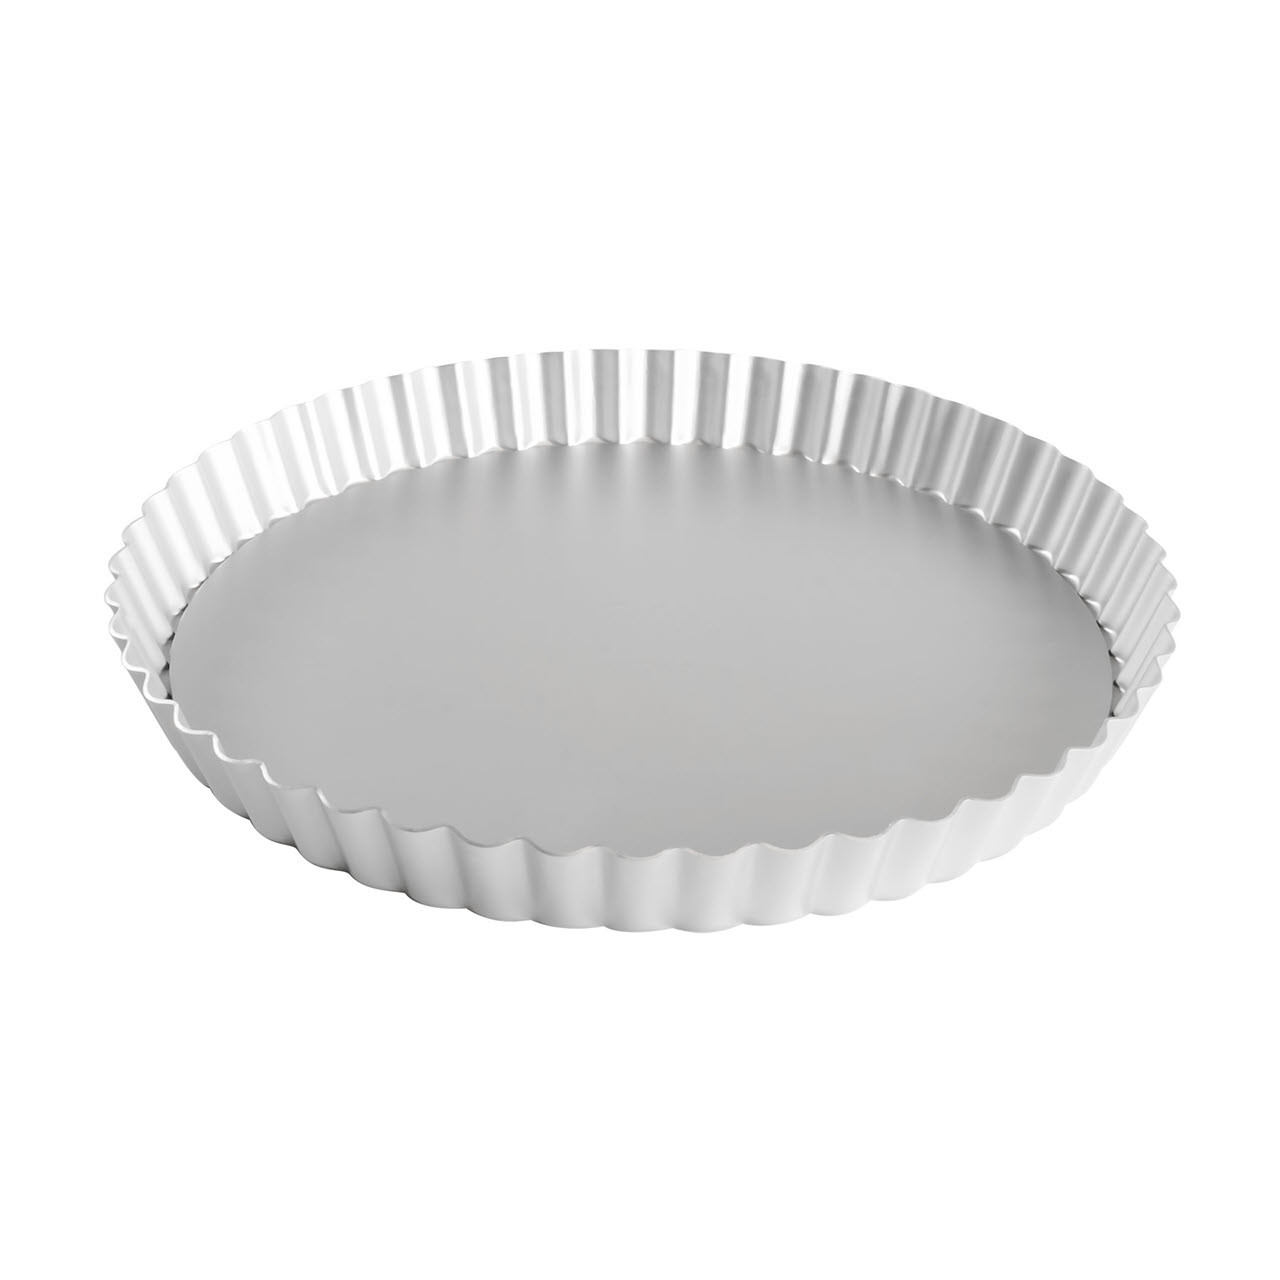 9-Inch Tart Pan Perforated Nonstick with Removable Bottom